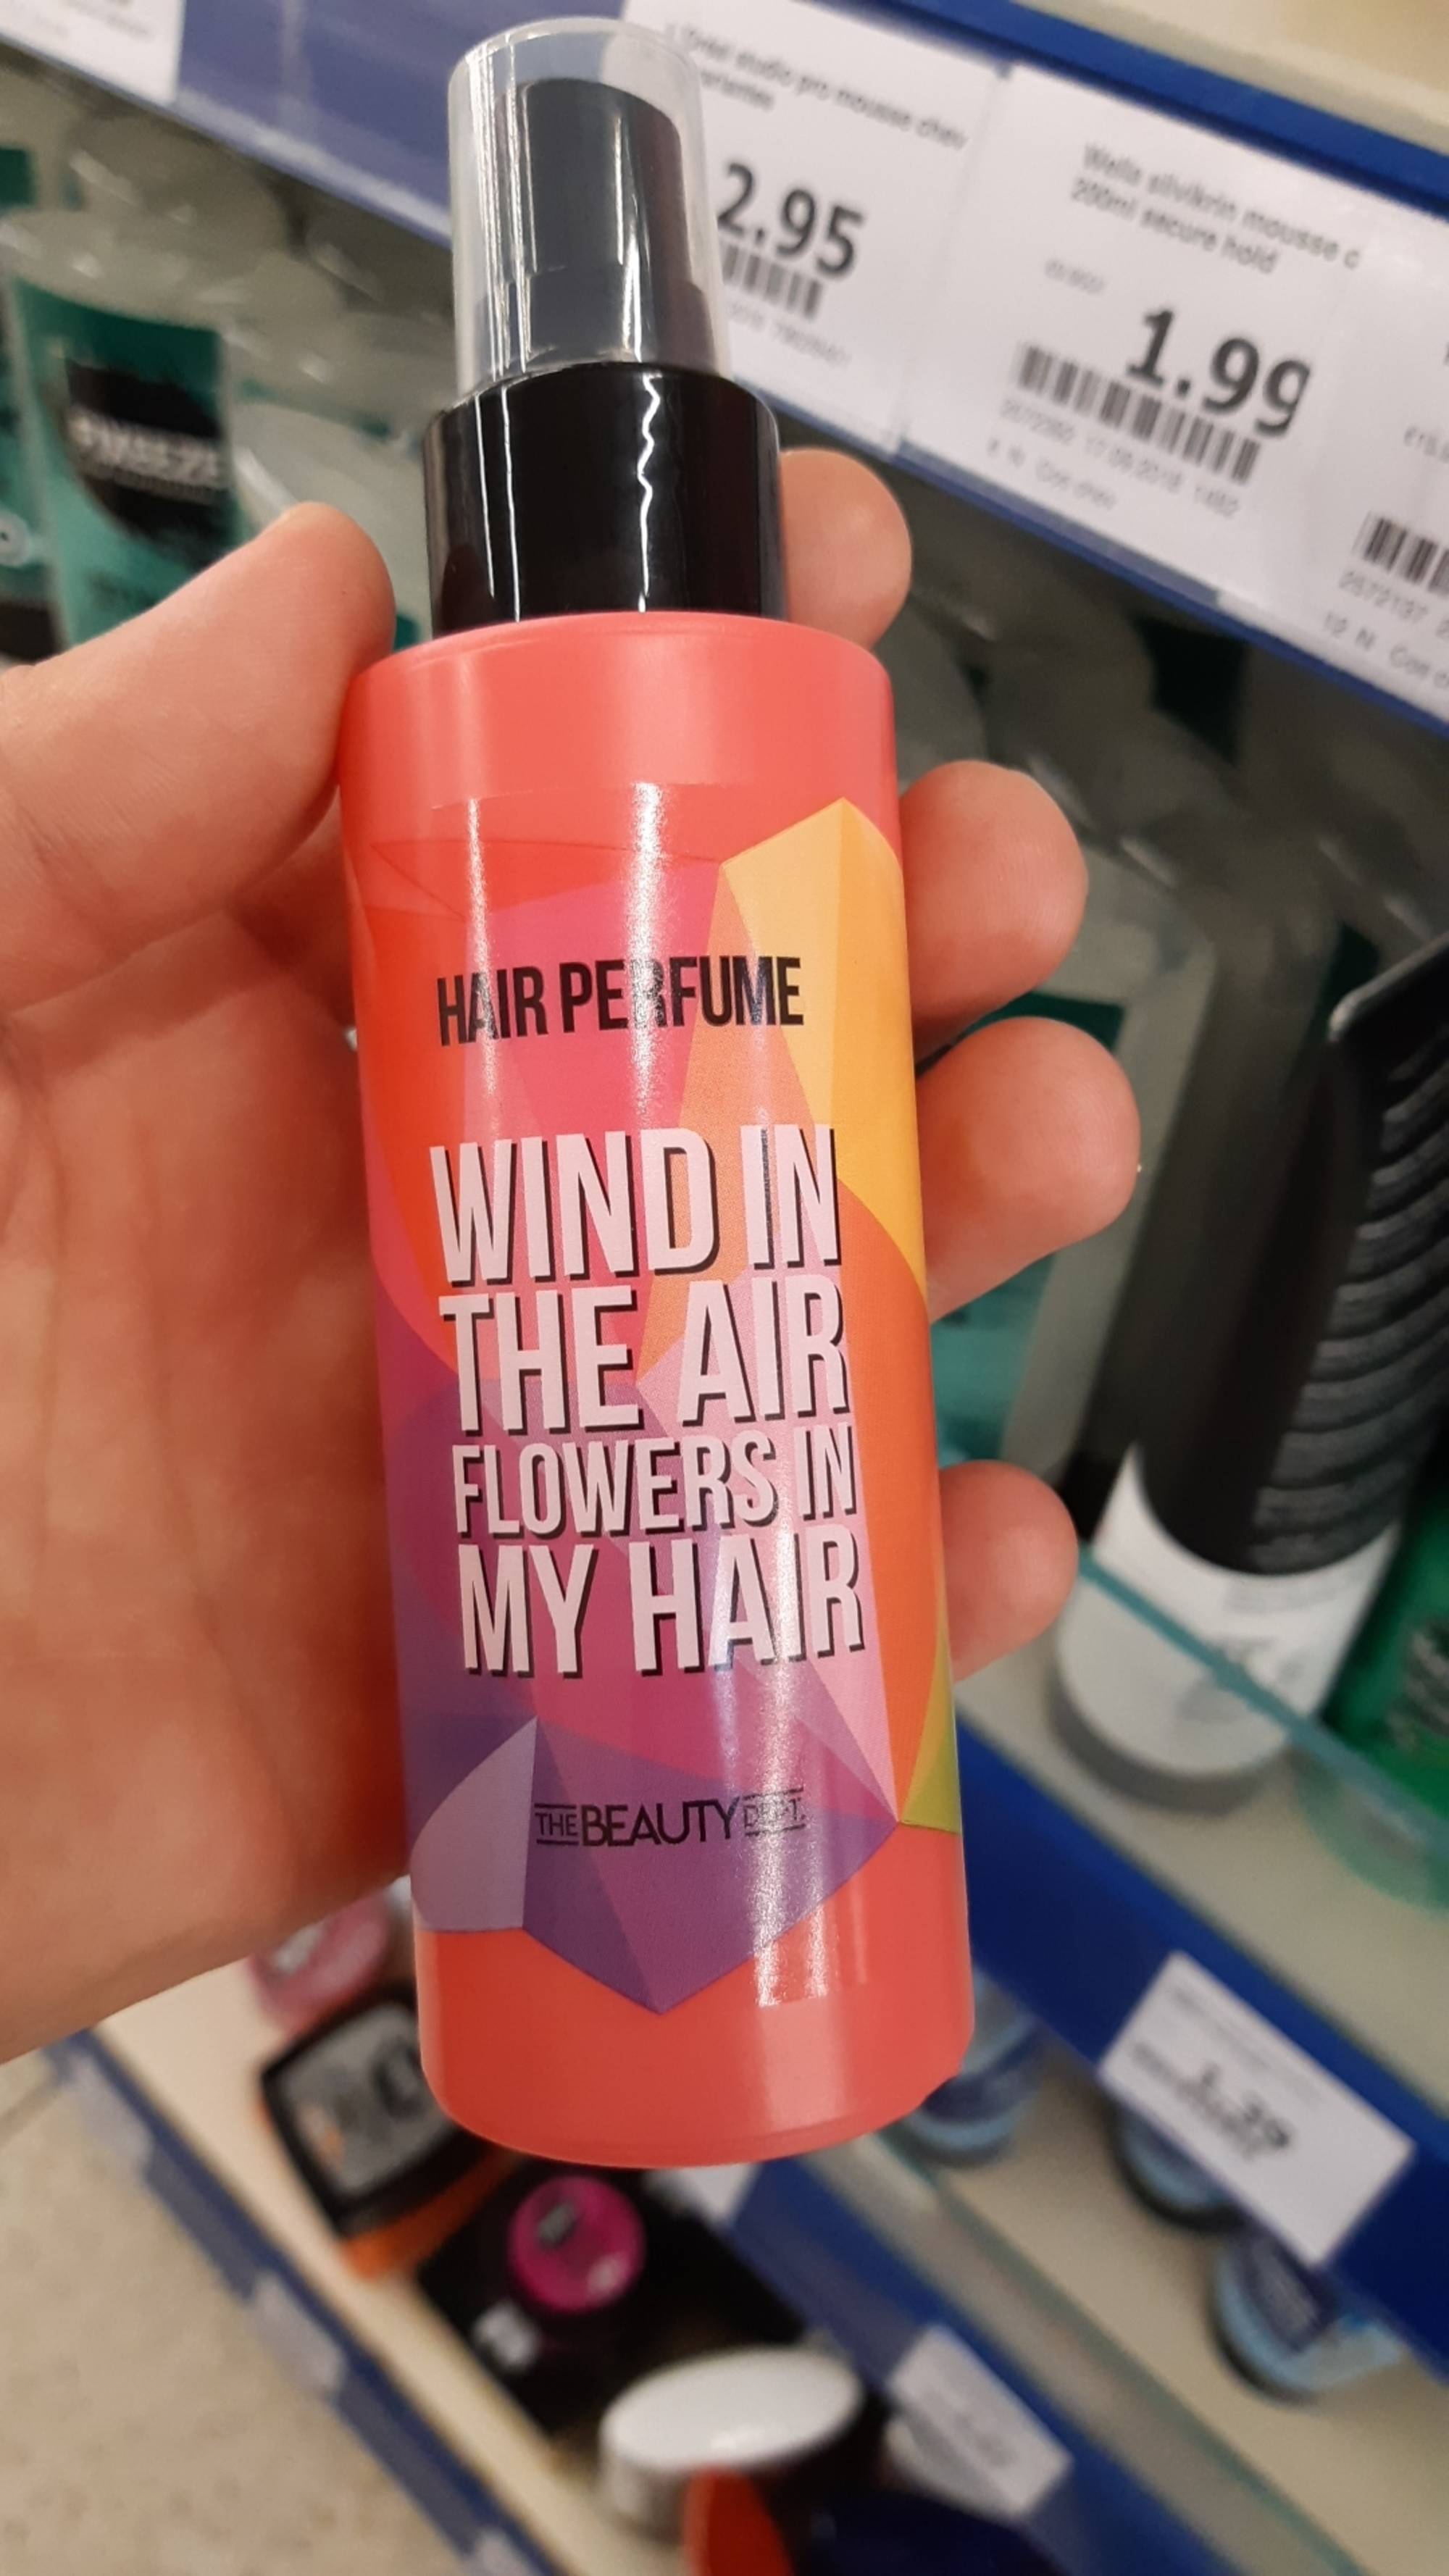 THE BEAUTY DEPT - Hair perfume - Wind in the air flowers in my hair